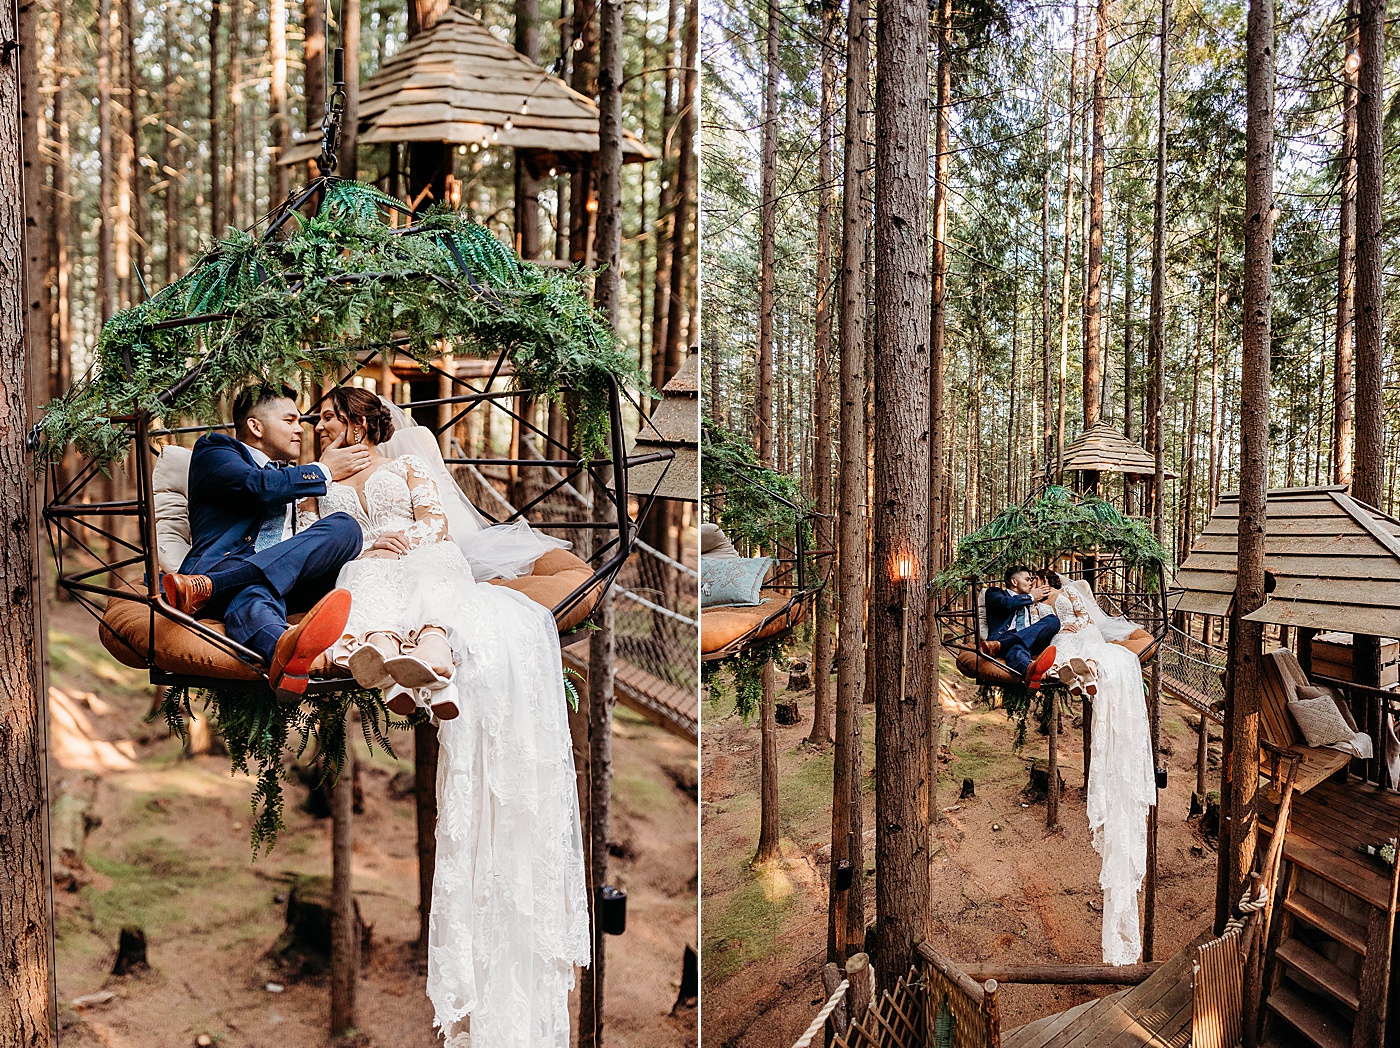 Bride and groom portraits in the treehouse at Emerald Forest | Photo by Megan Montalvo Photography